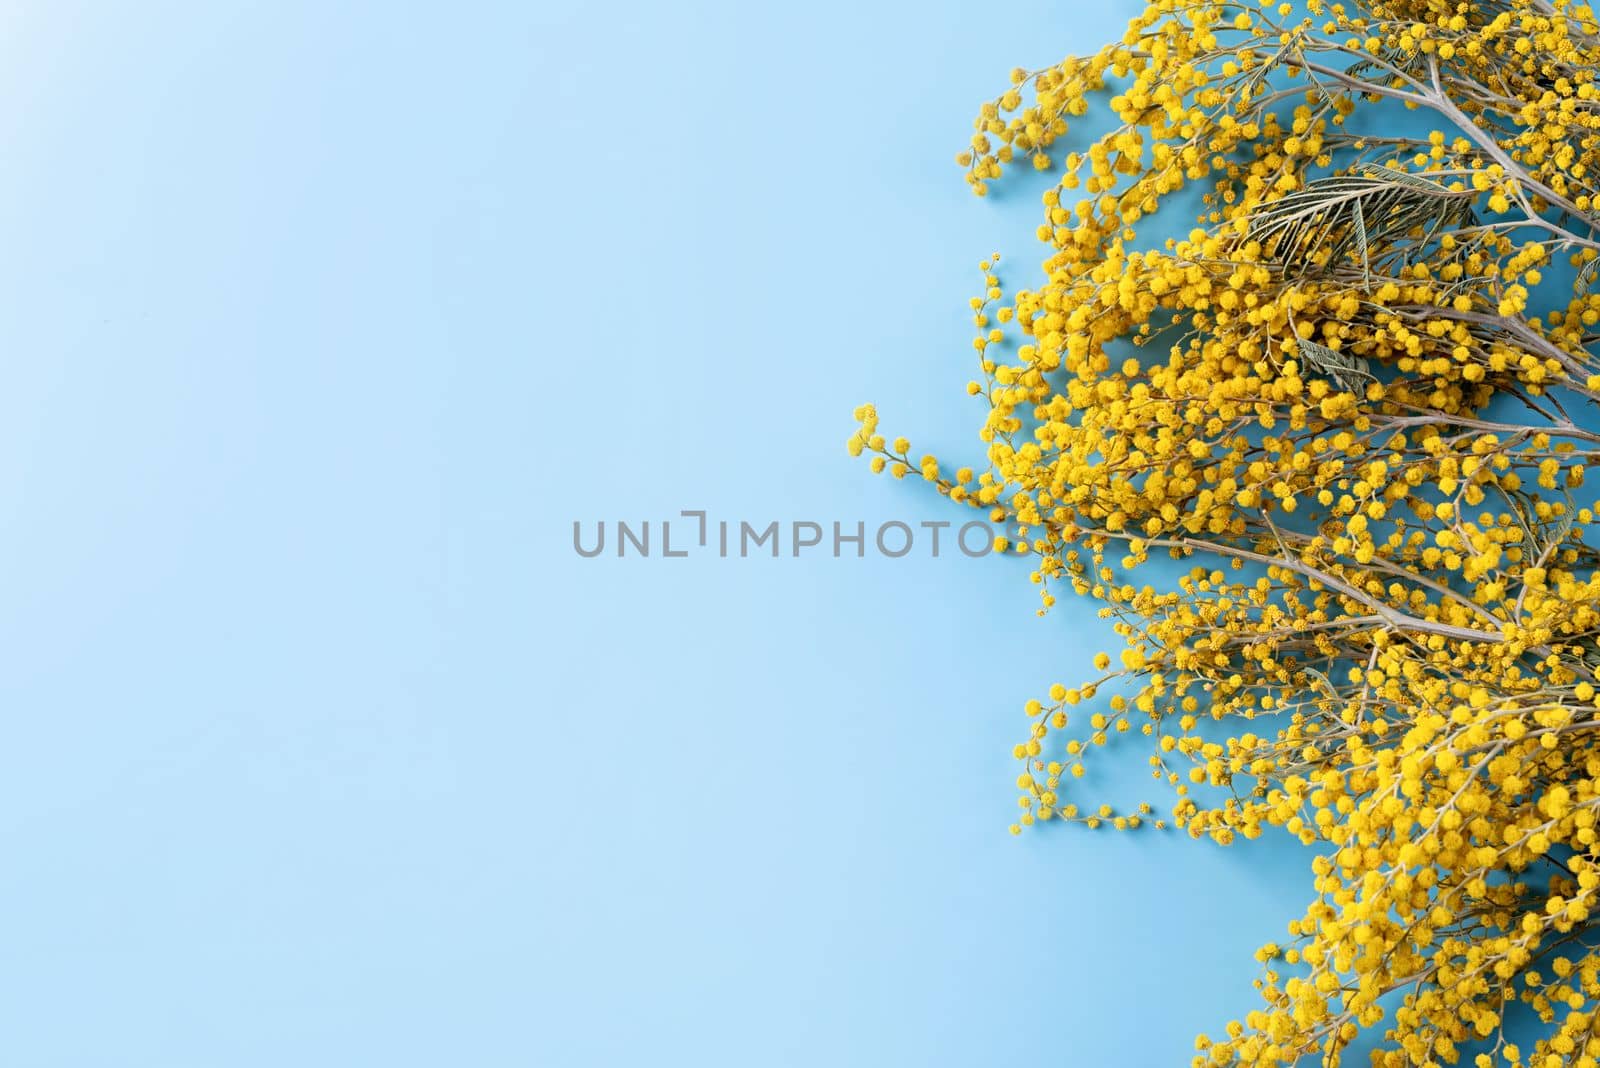 Frame of yellow mimosa flowers on blue solid bakground. Spring concept. Flat lay. Top view, banner